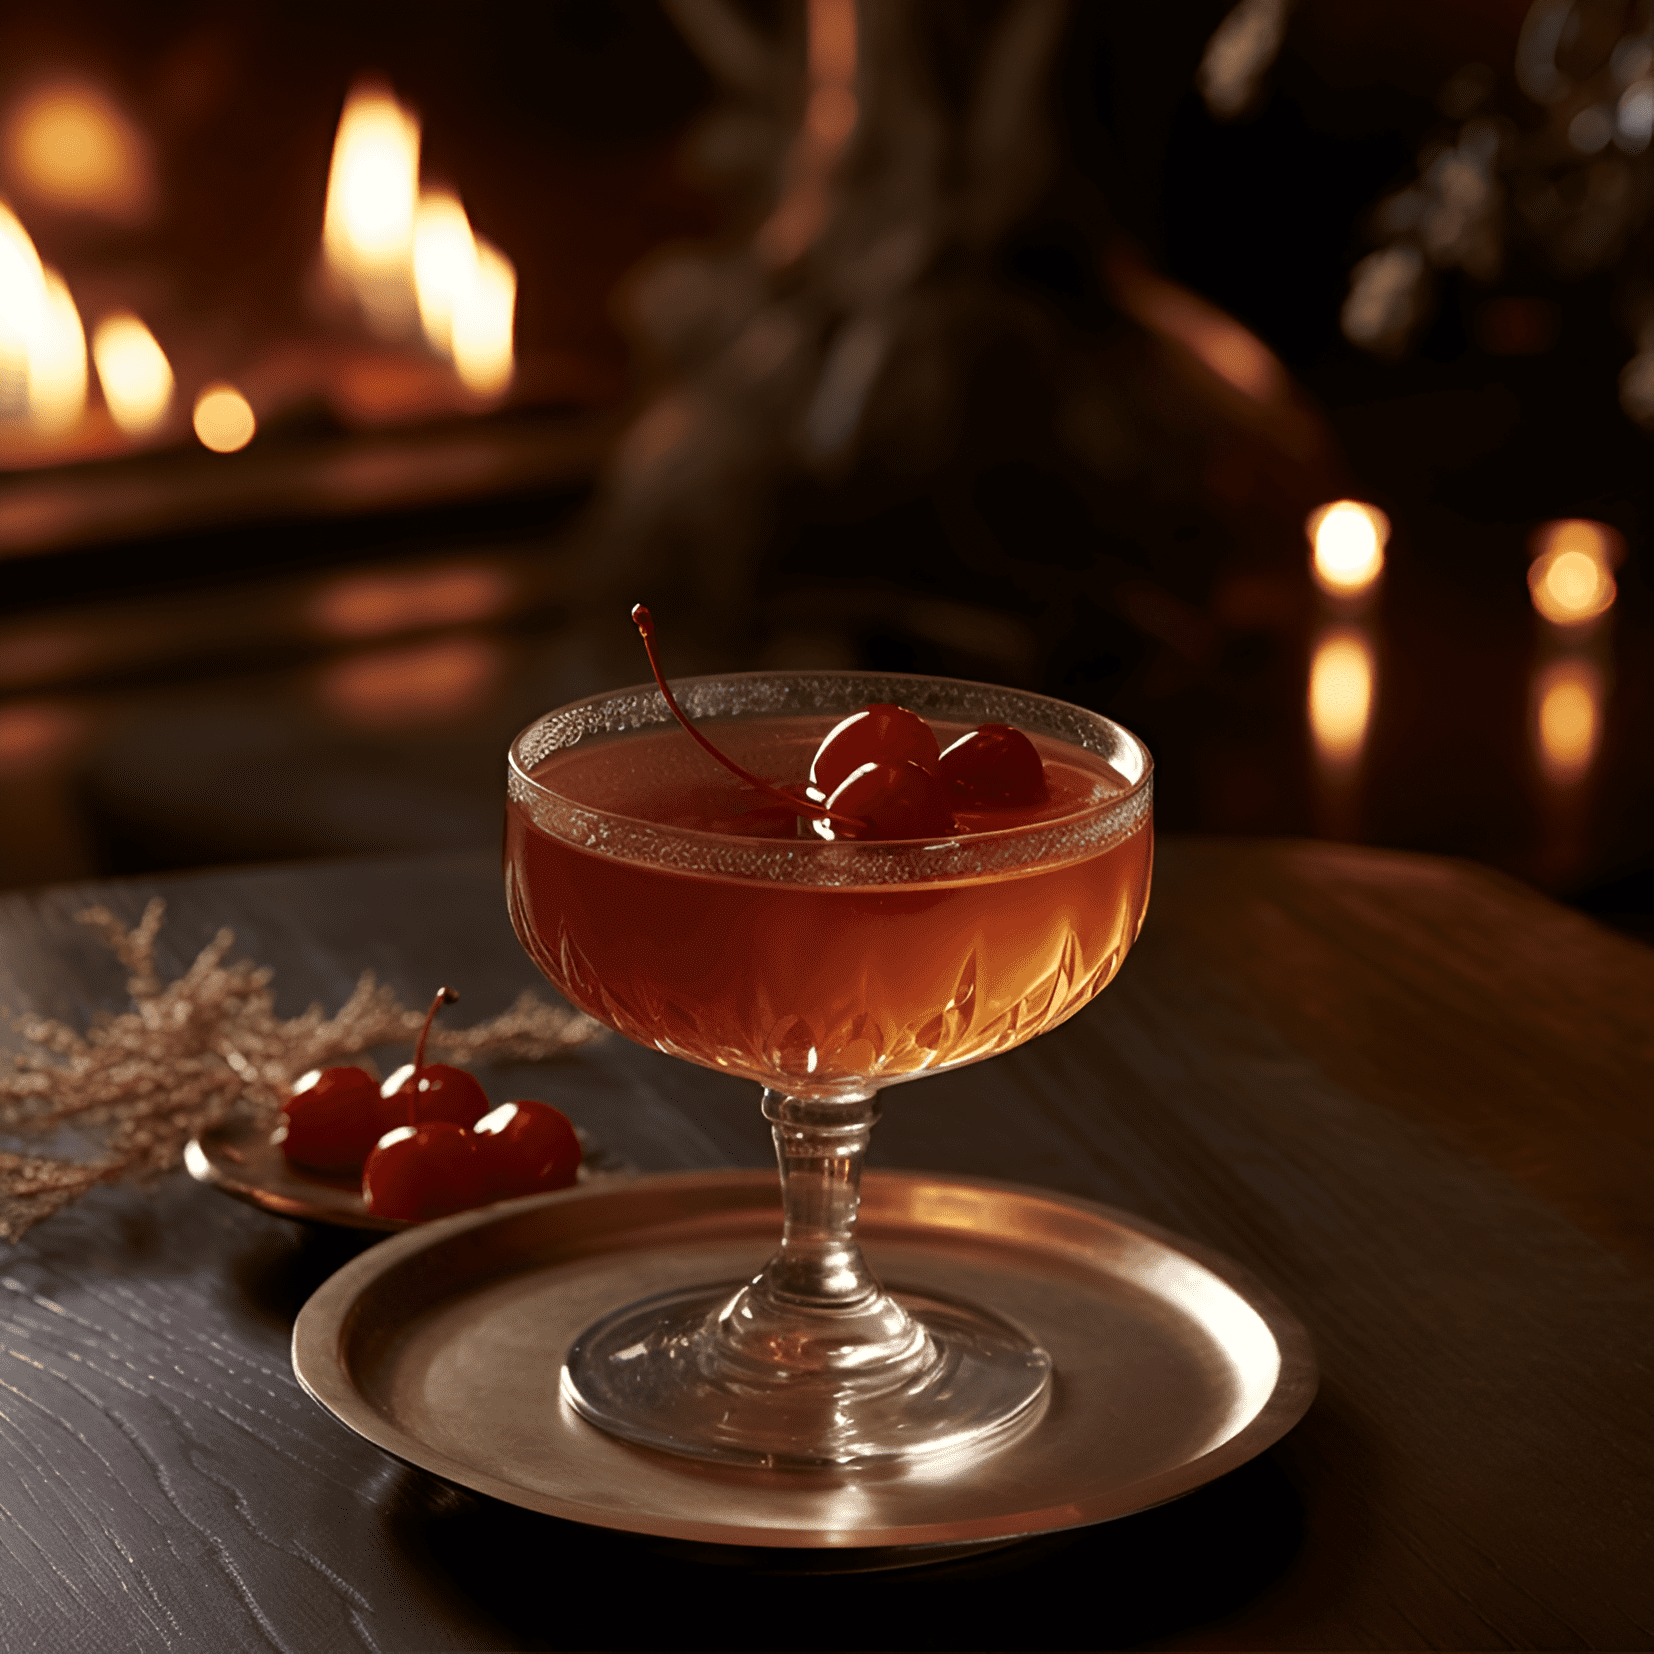 The Red Hook cocktail is a well-balanced mix of sweet, bitter, and strong flavors. It has a rich, velvety texture with a hint of spice from the rye whiskey, and a pleasant bitterness from the Punt e Mes and maraschino liqueur.